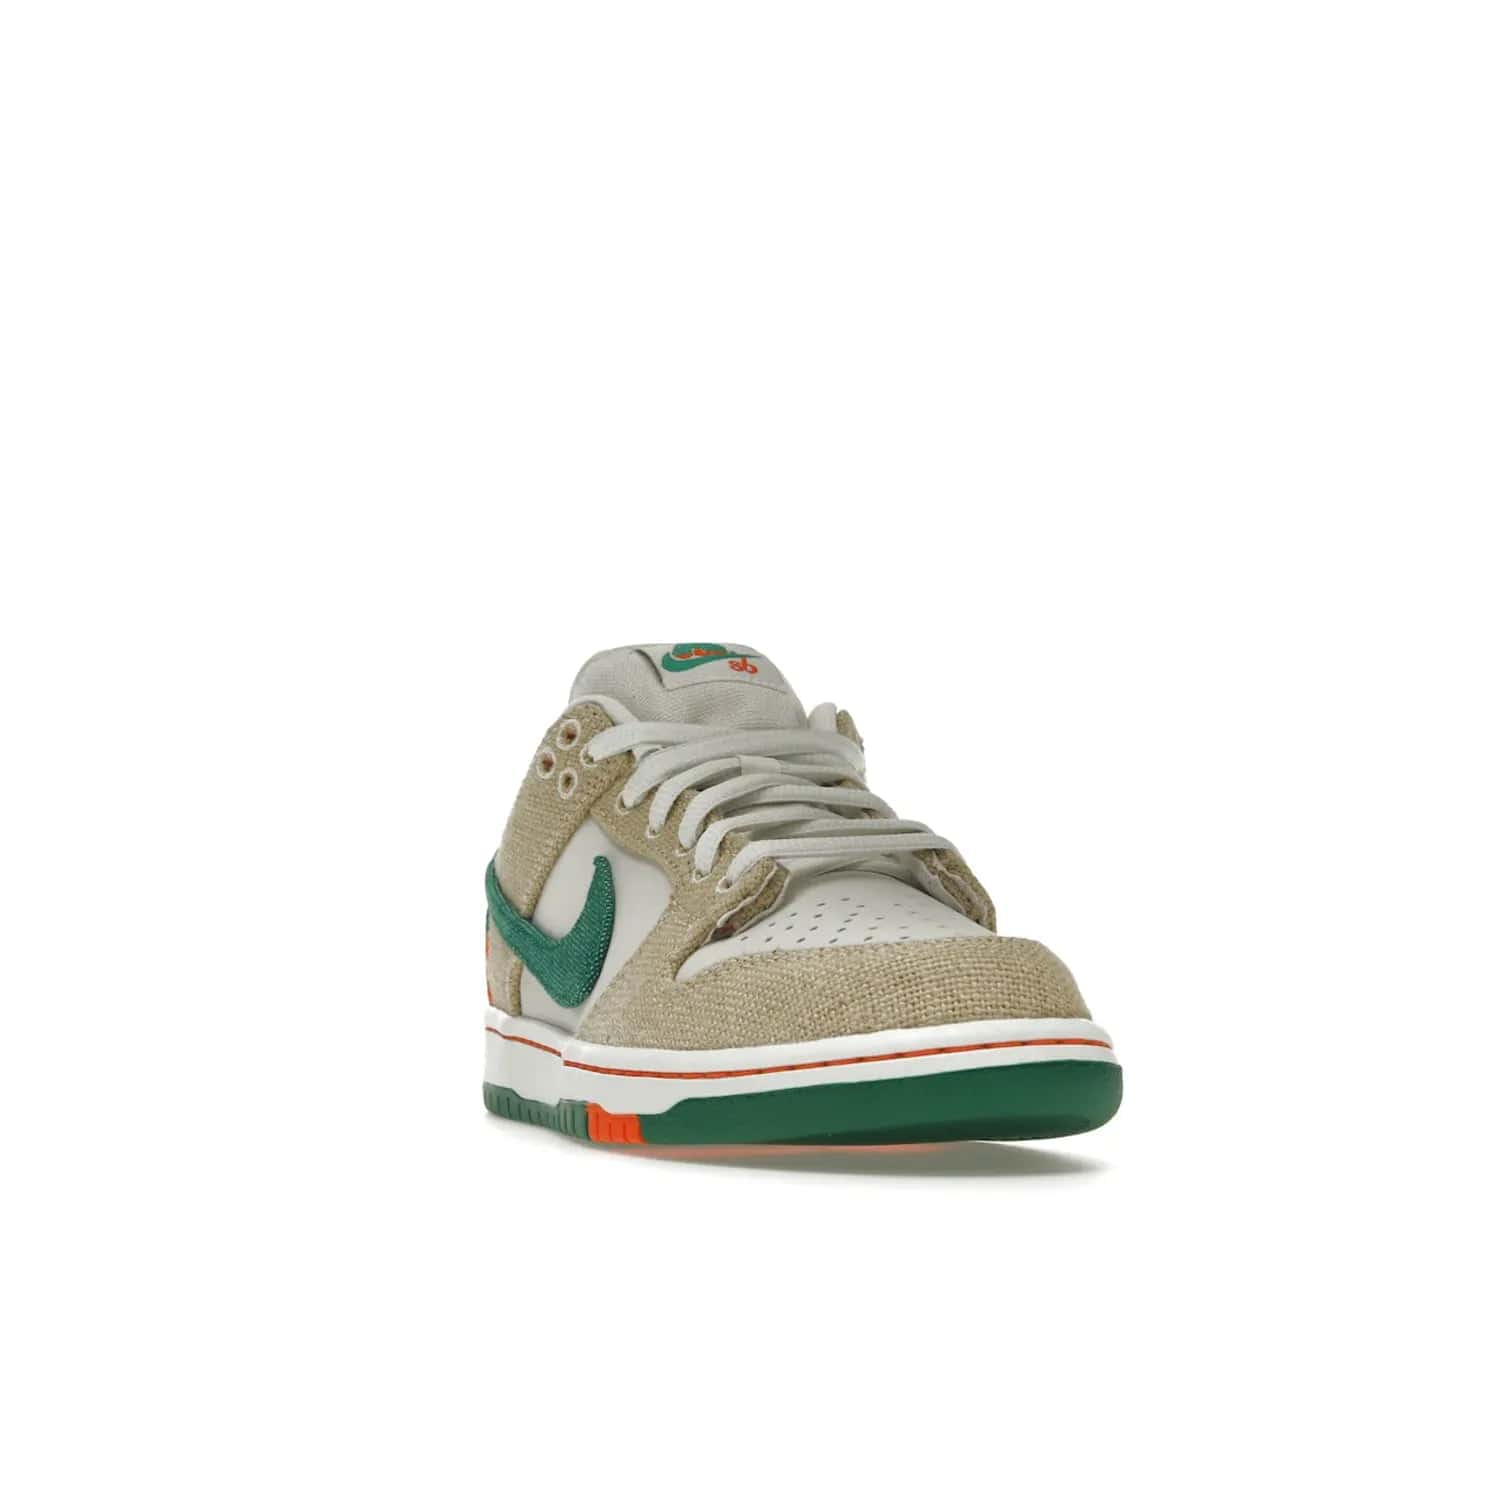 Nike SB Dunk Low Jarritos - Image 8 - Only at www.BallersClubKickz.com - Shop limited edition Nike SB Dunk Low Jarritos! Crafted with white leather and tear-away canvas materials with green accents. Includes orange, green, and white laces to customize your look. Available now.